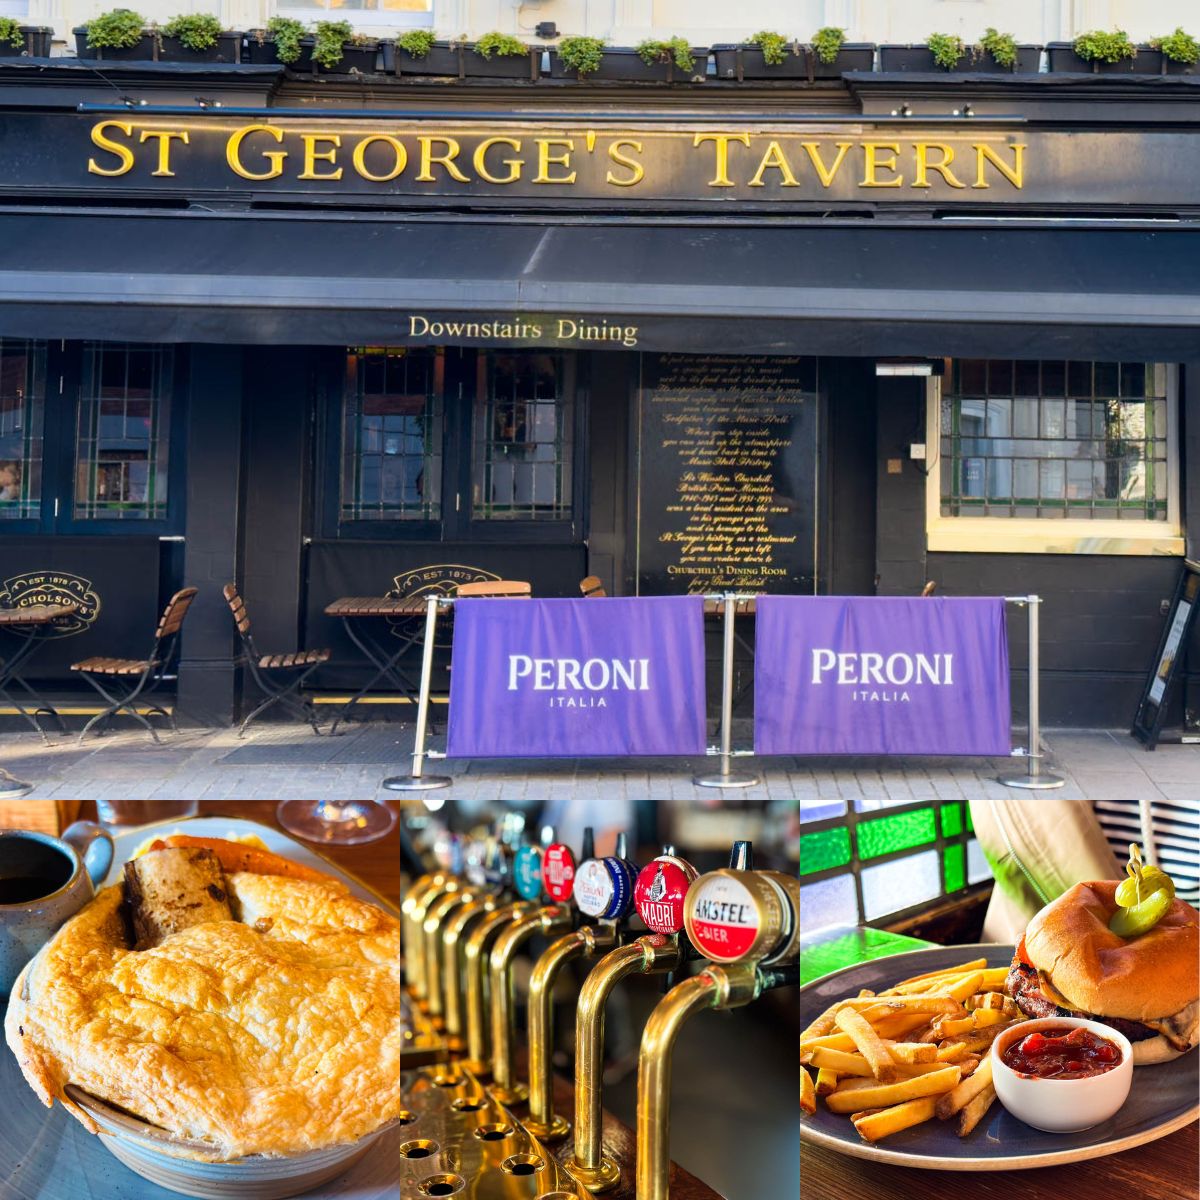 The photo collage shows St. George's Tavern next to photos of the food they offer.